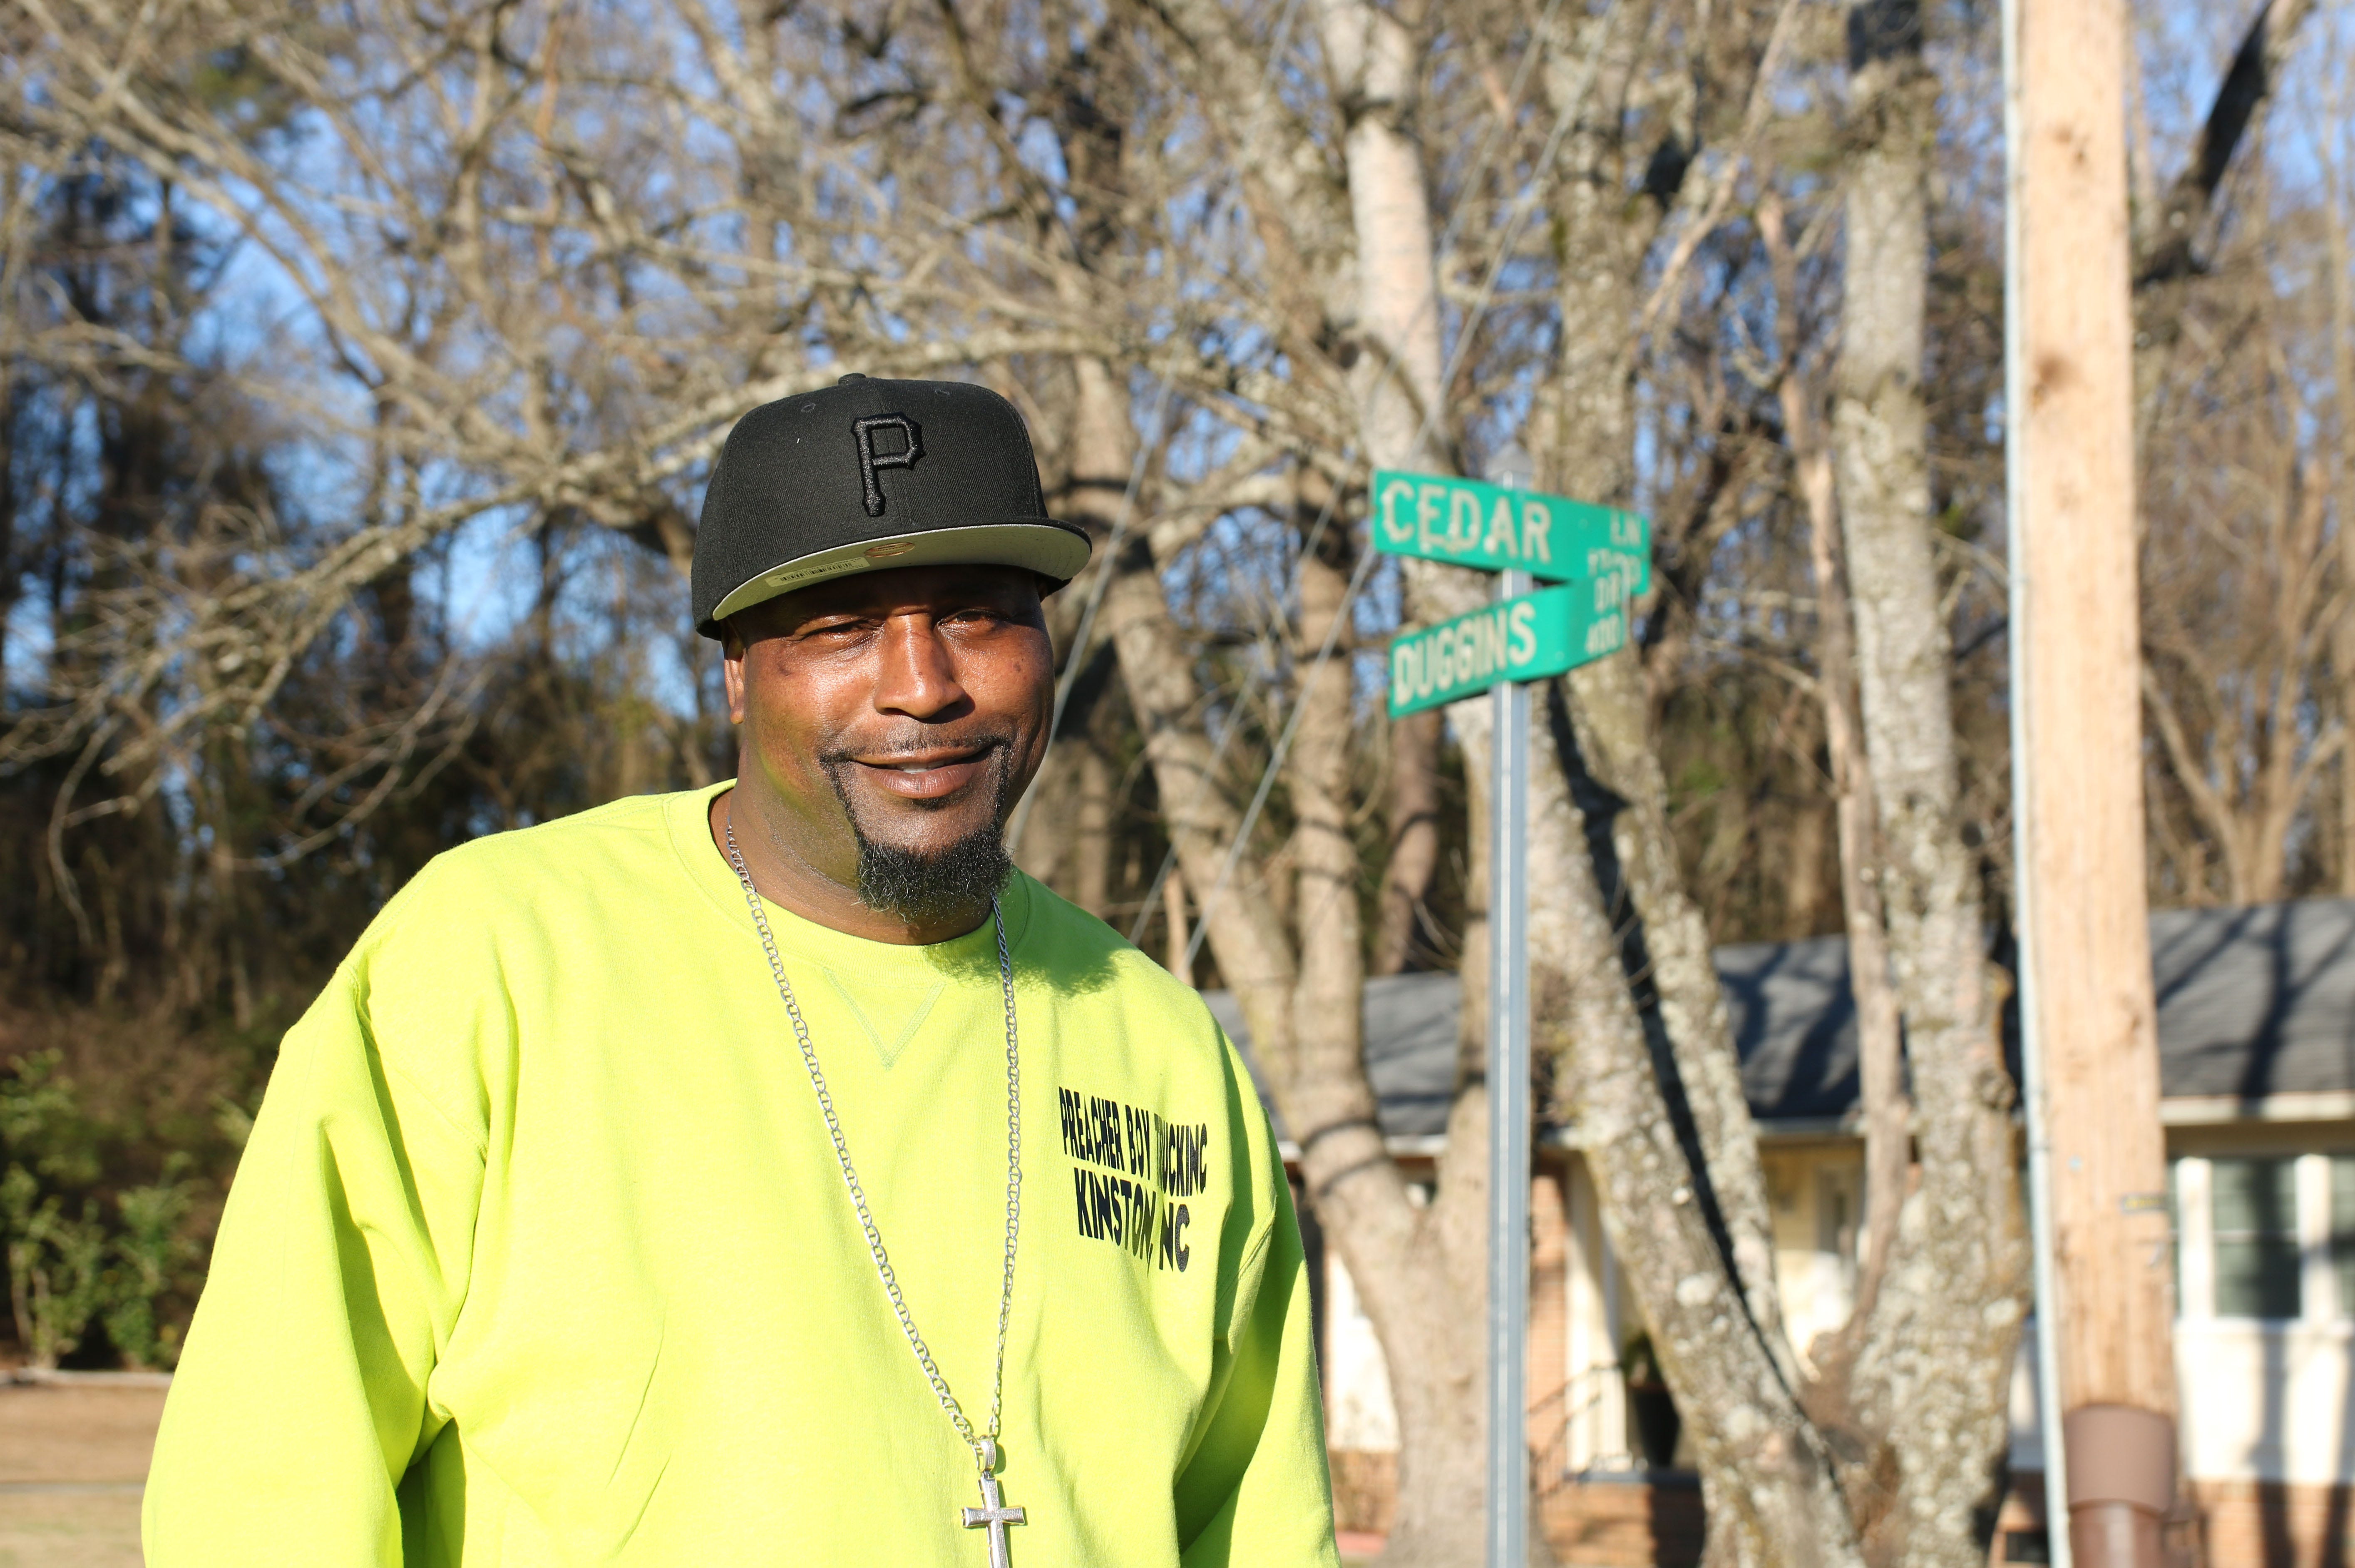 Tyshun Wilson stands at the corner of Cedar Lane and Duggins Drive in East Kinston where he grew up.